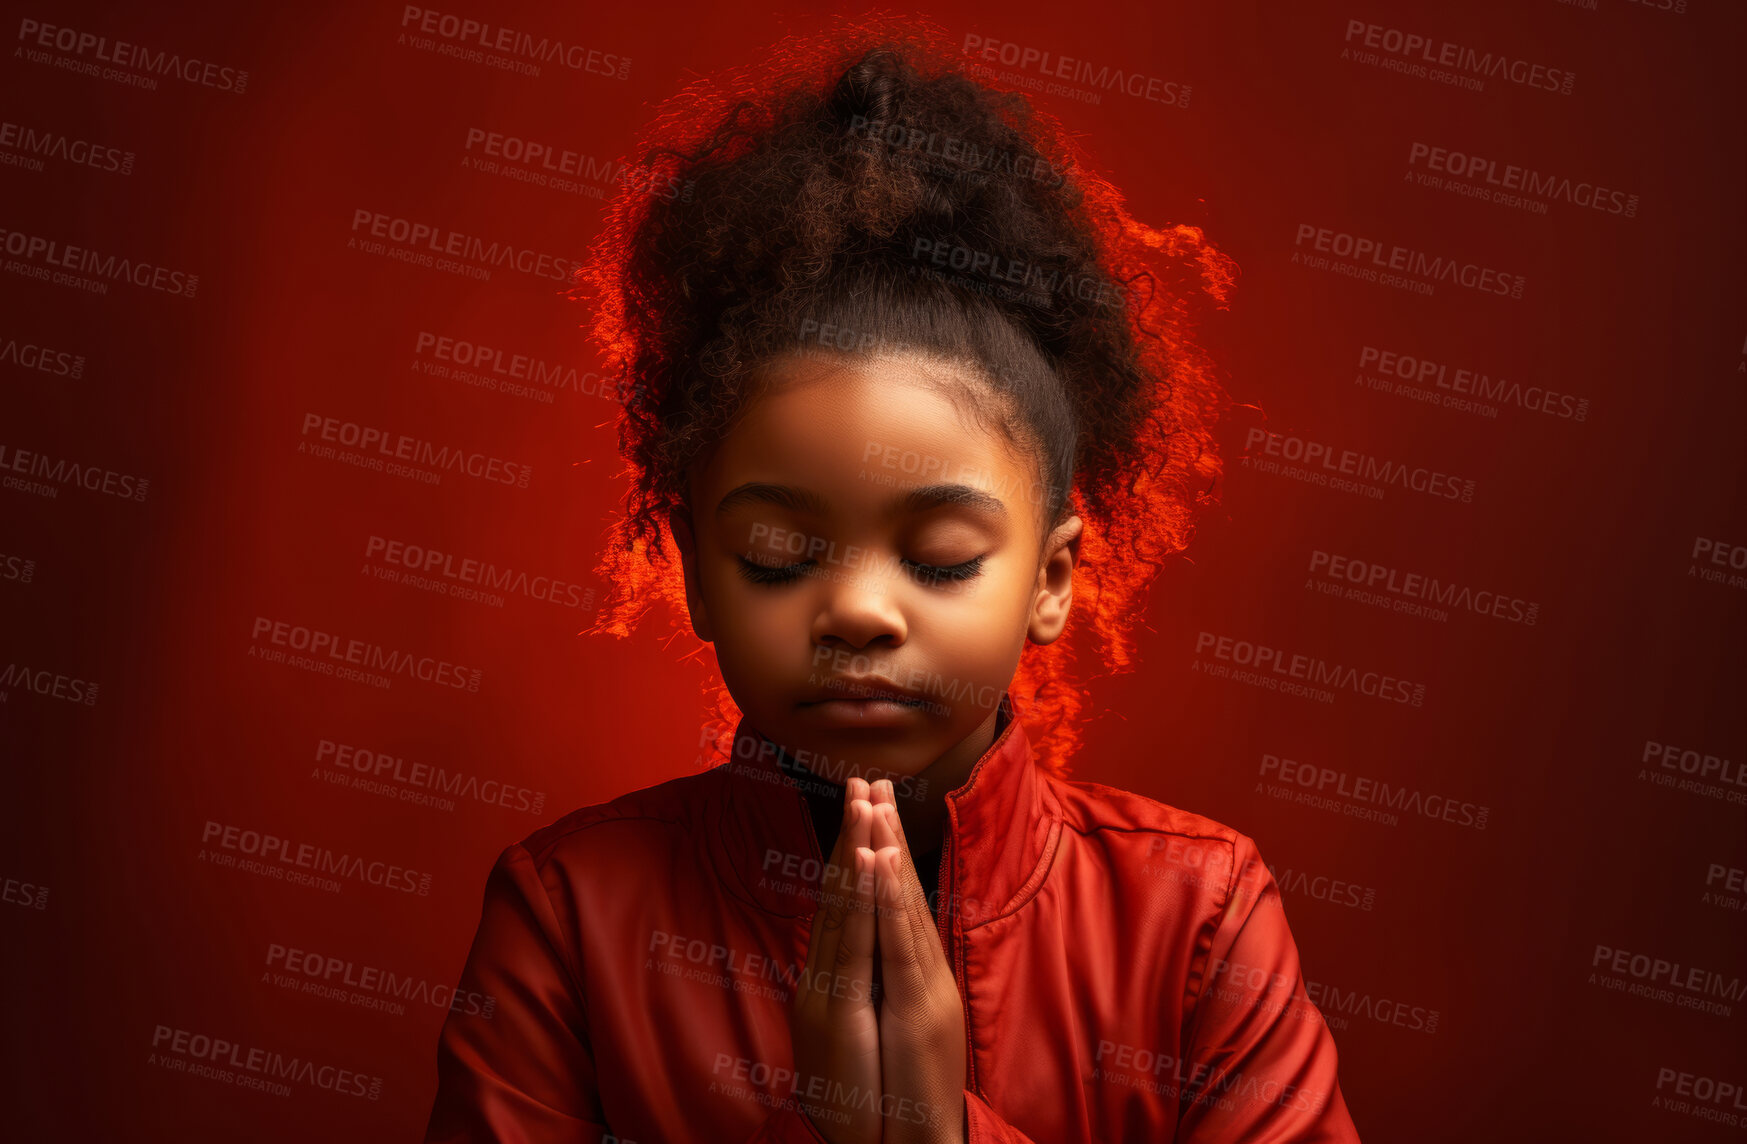 Buy stock photo African American child praying. Studio portrait. Red backdrop. Religion concept.